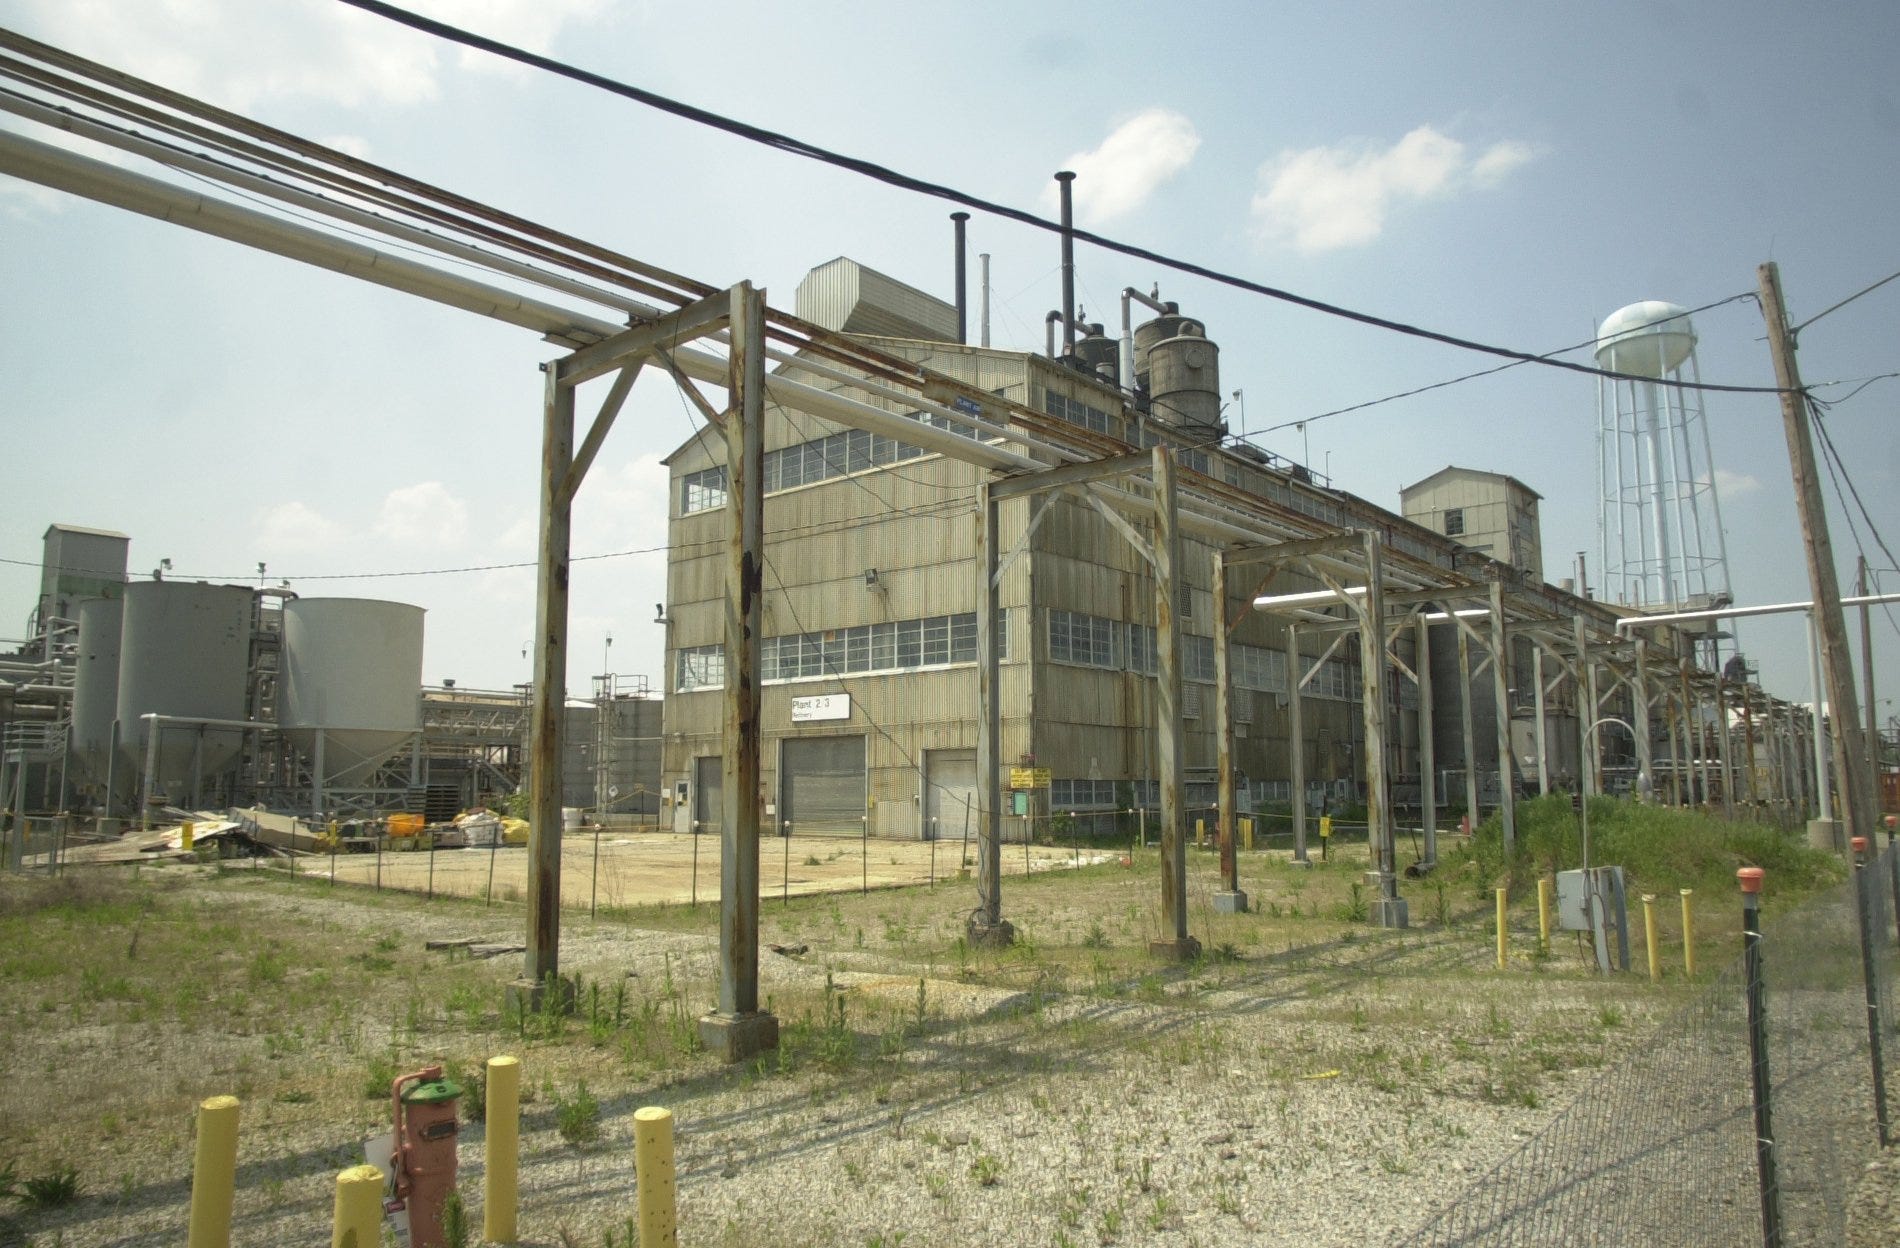 Plant 2, 3 at Fluor Fernald originally was the refinery that converted the government stockpile of natural uranium ore concentrates. Photo taken in 2001.